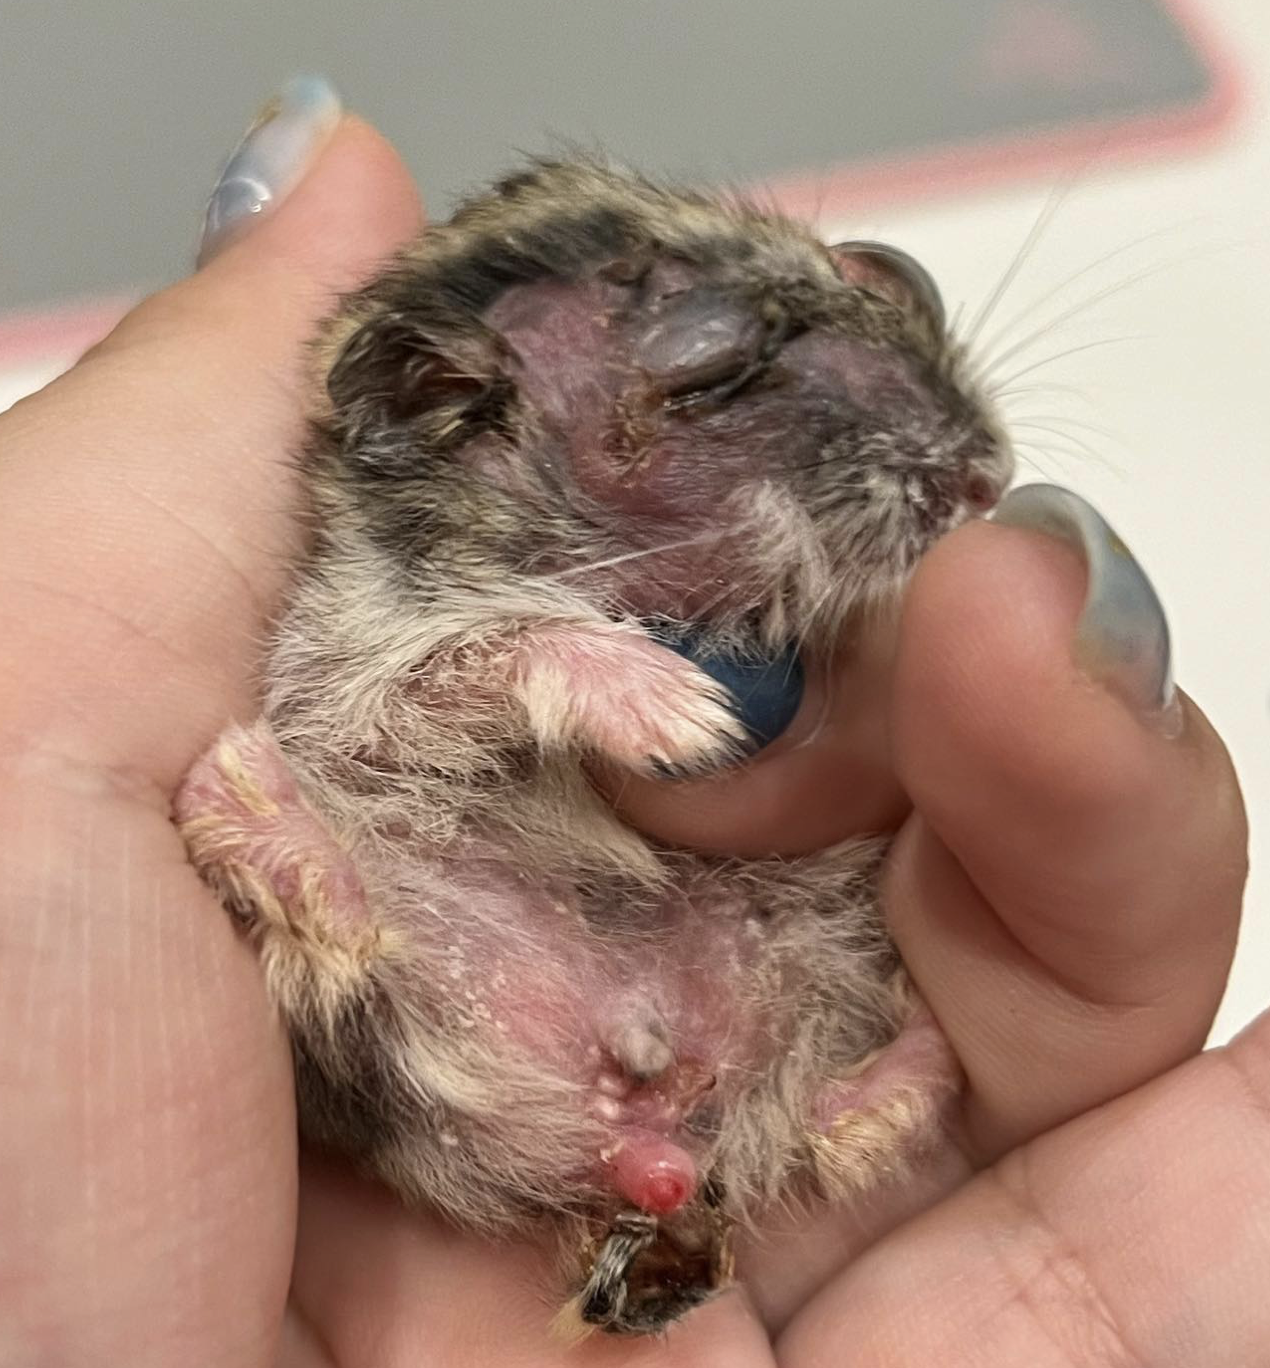 Hamster discovered severely uncared for by S’pore preschool put scrutiny on holding classroom pets – Mothership.SG